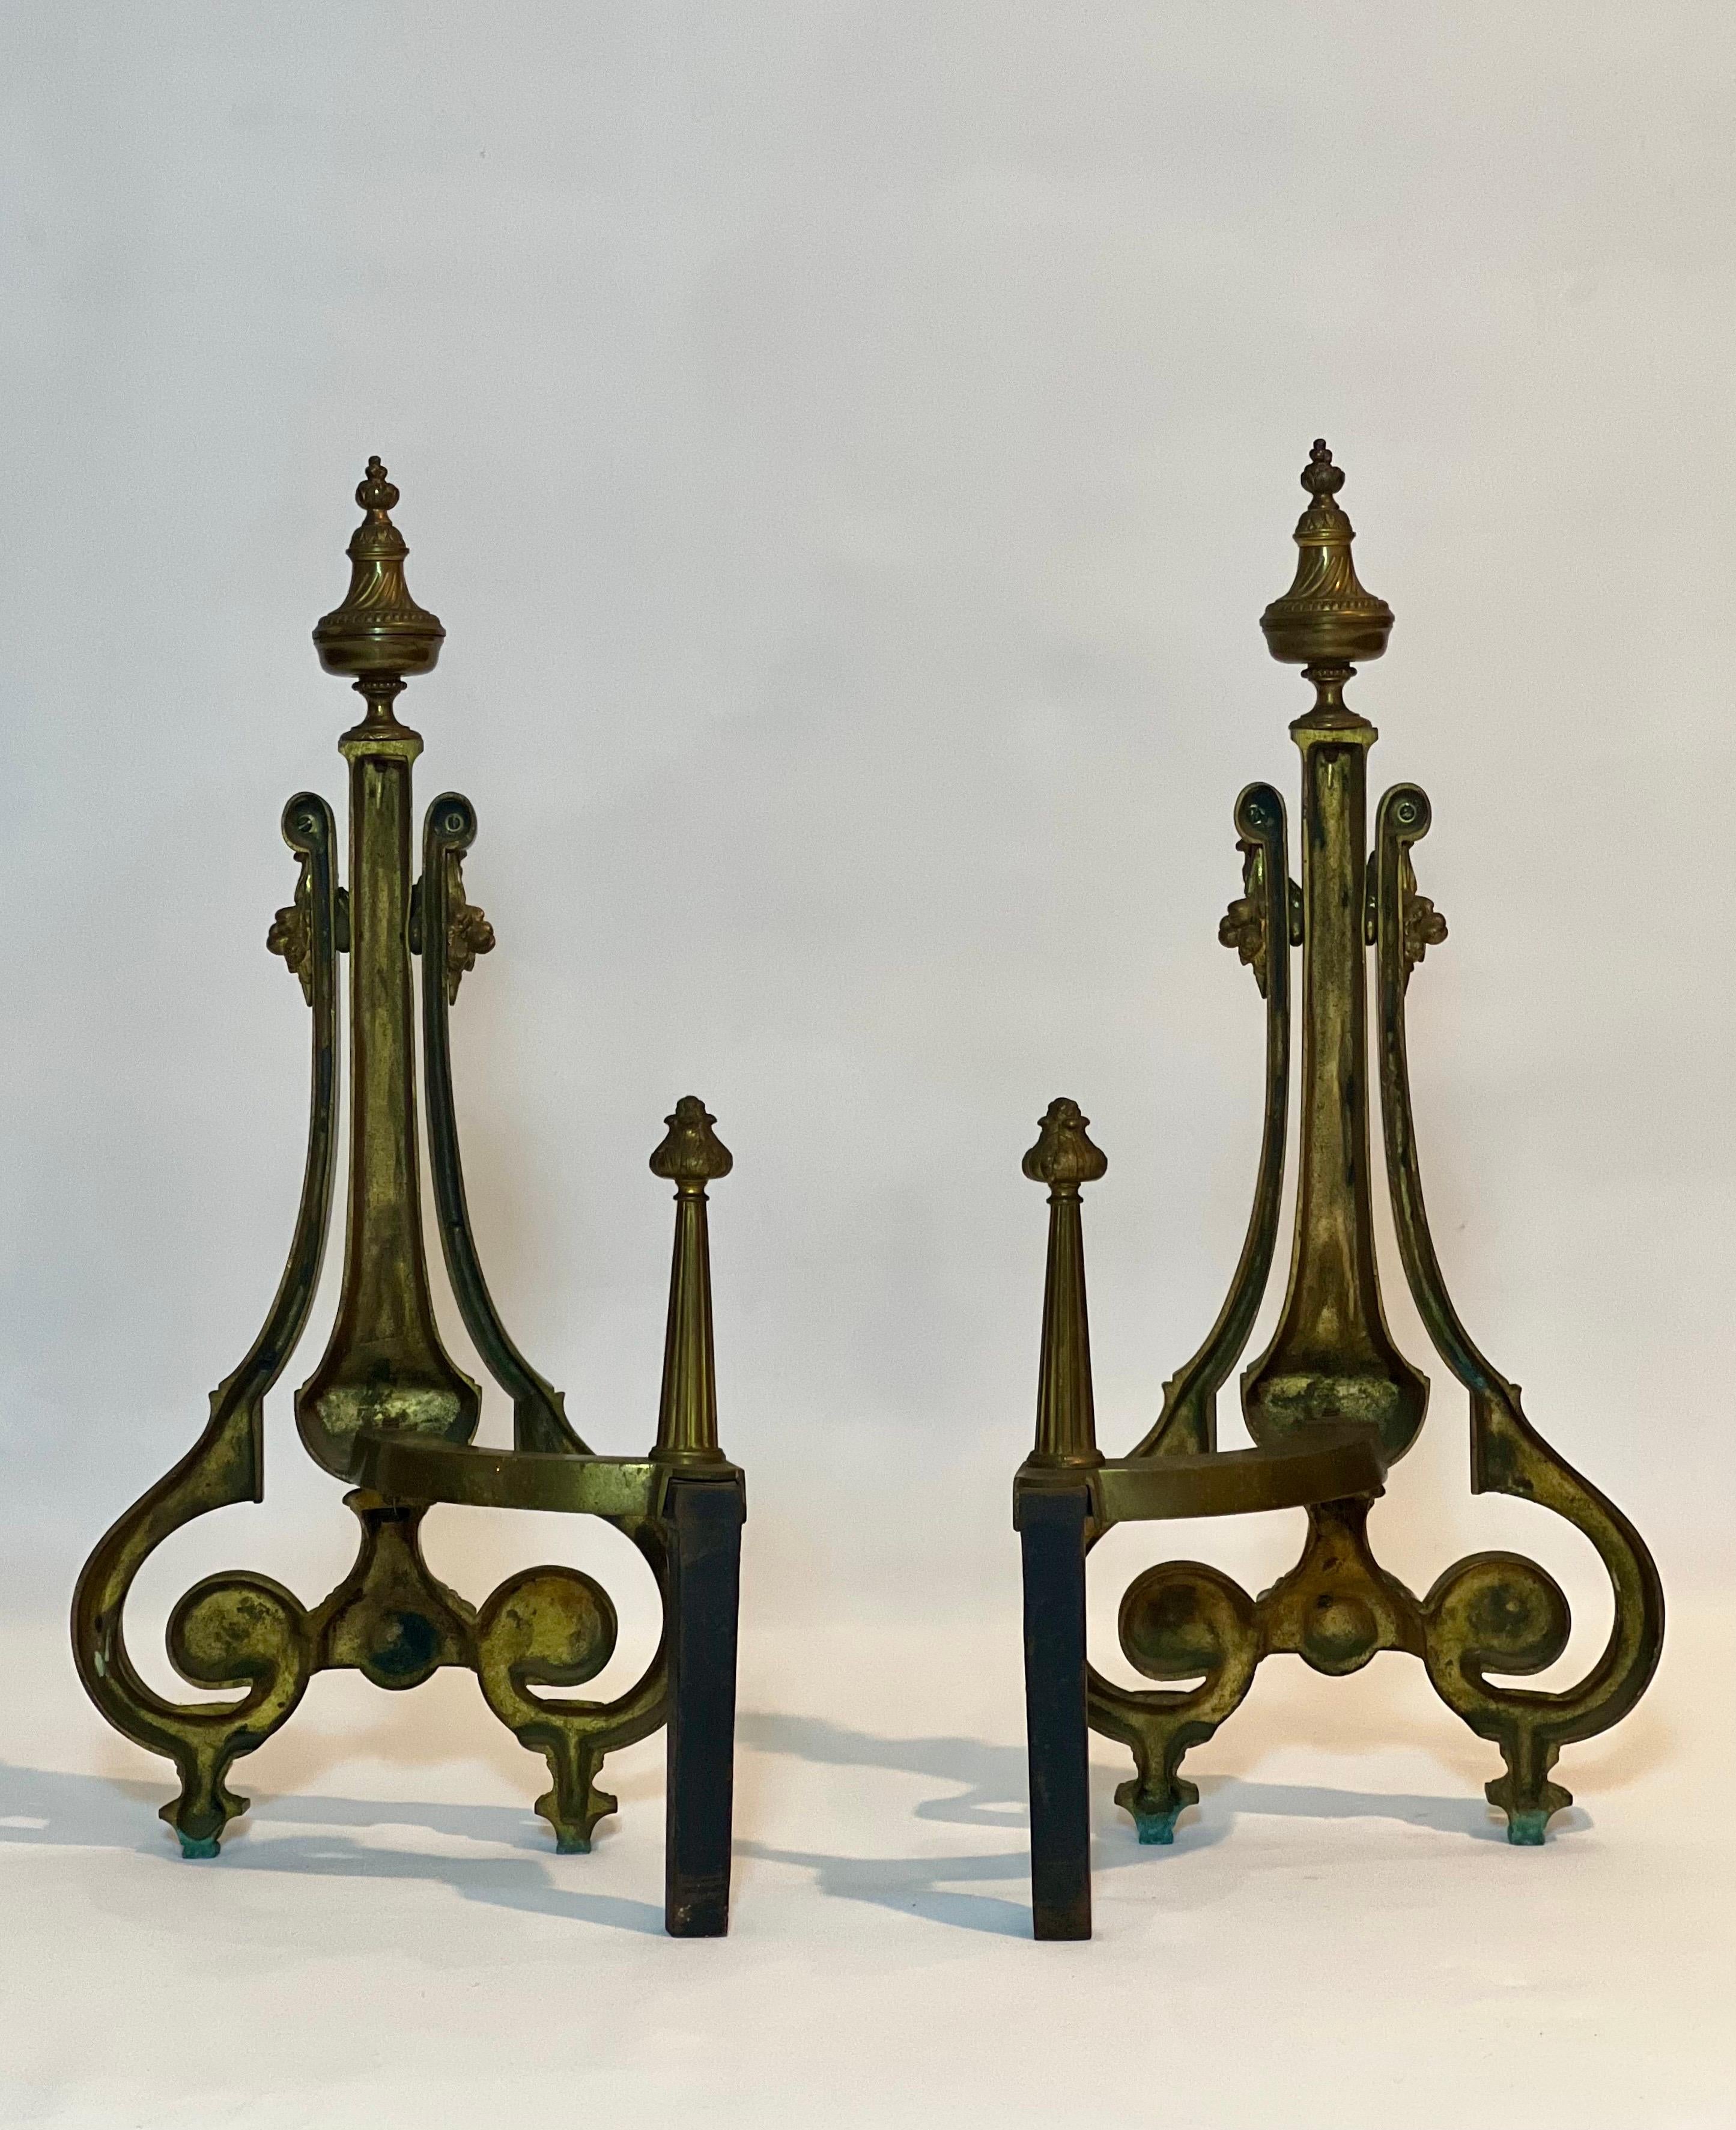 William H. Jackson Company Neoclassical French Empire Style Gilt Brass Andirons In Good Condition For Sale In Doylestown, PA